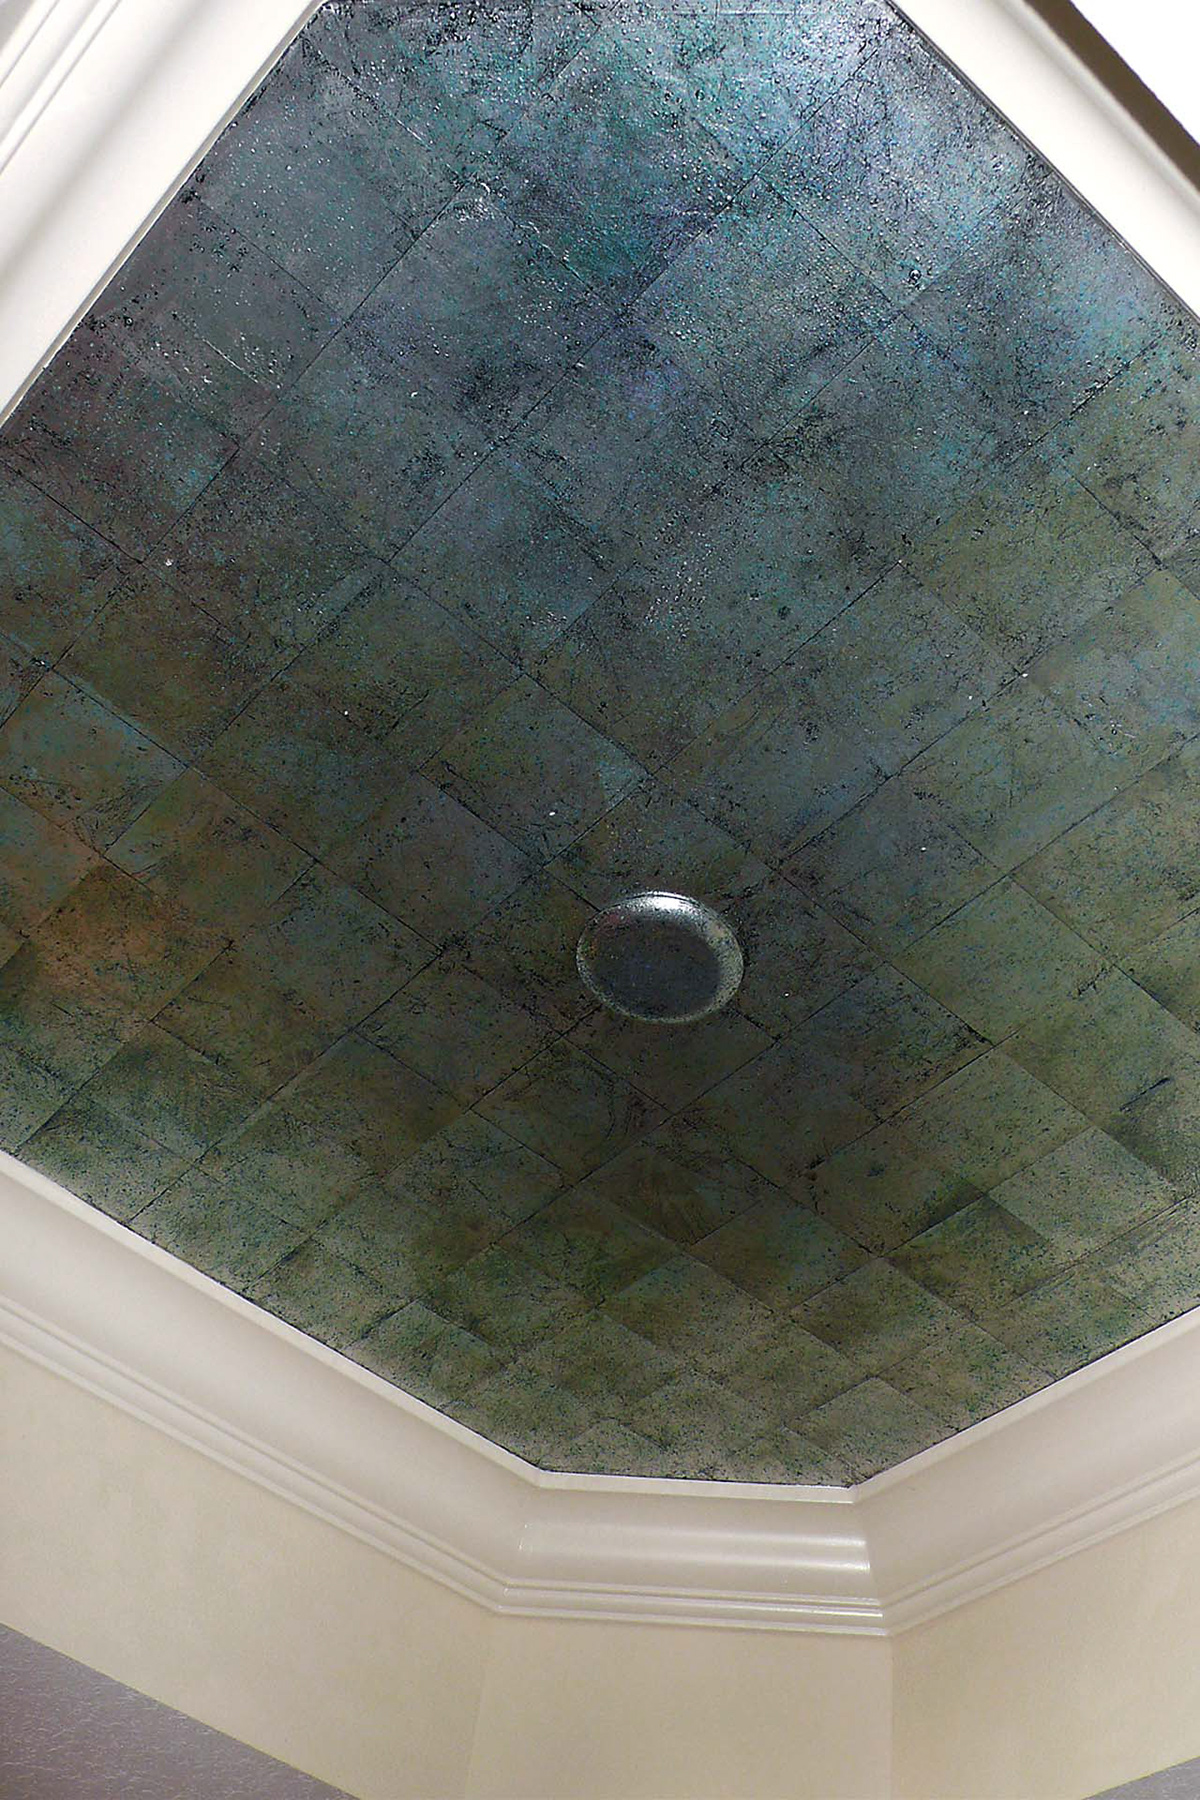 faux Mural tray ceiling dining room ceiling stuccolux Lusterstone metallic foil foyer foyer ceiling foyer tray ceiling